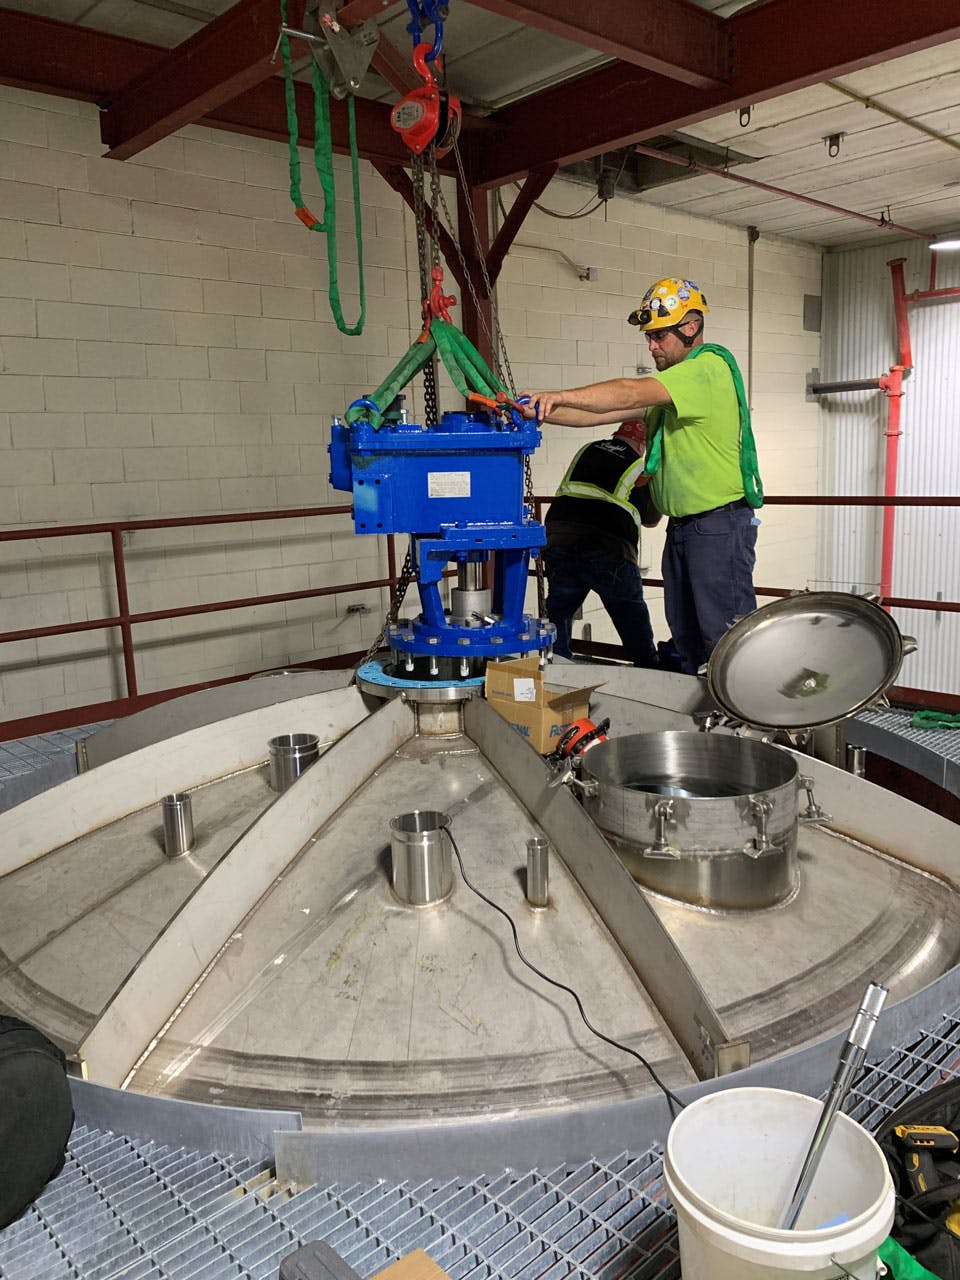 NOV employees working on a mixer and open container in a facility